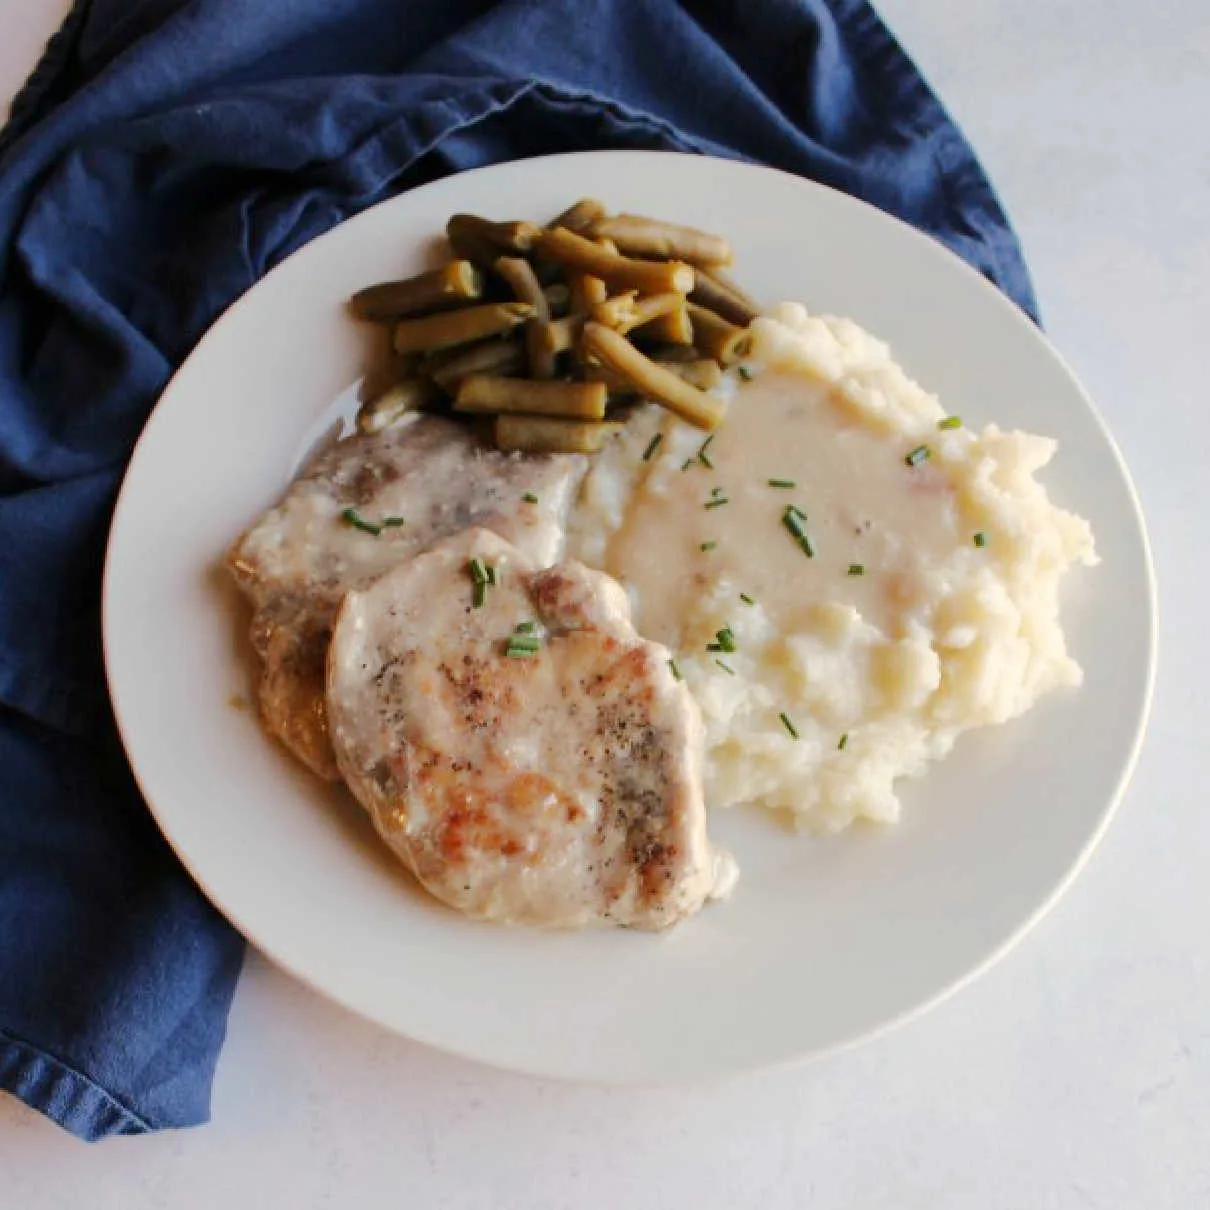 dinner plate filled with pork chops, mashed potatoes, green beans and mushroom soup gravy.